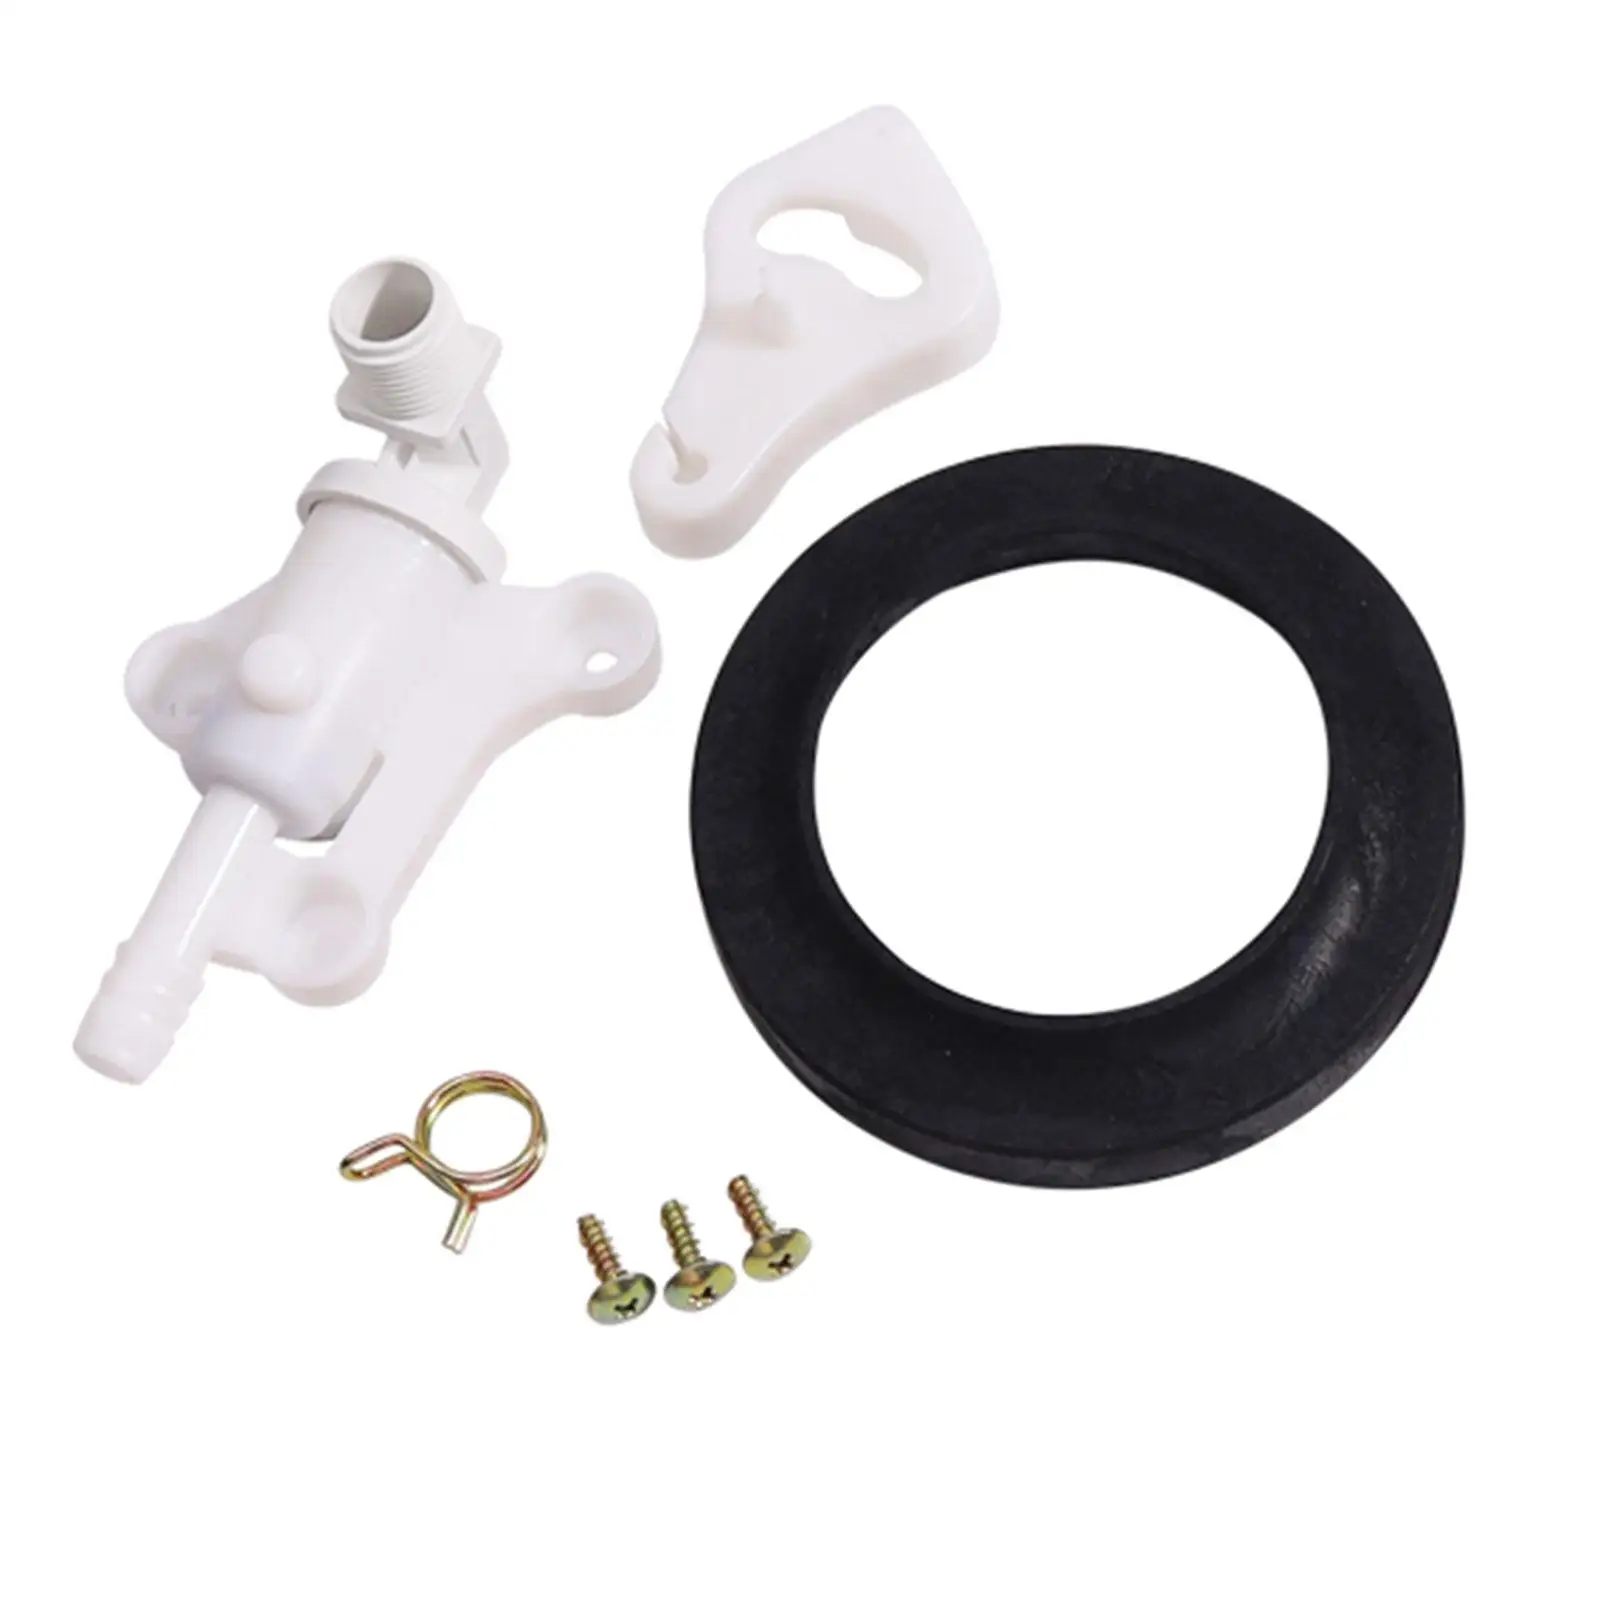 34100 RV Toilet Water Valve for Style Lite Toilets Replacements RV Toilet Valve with RV ball Seal for Durable